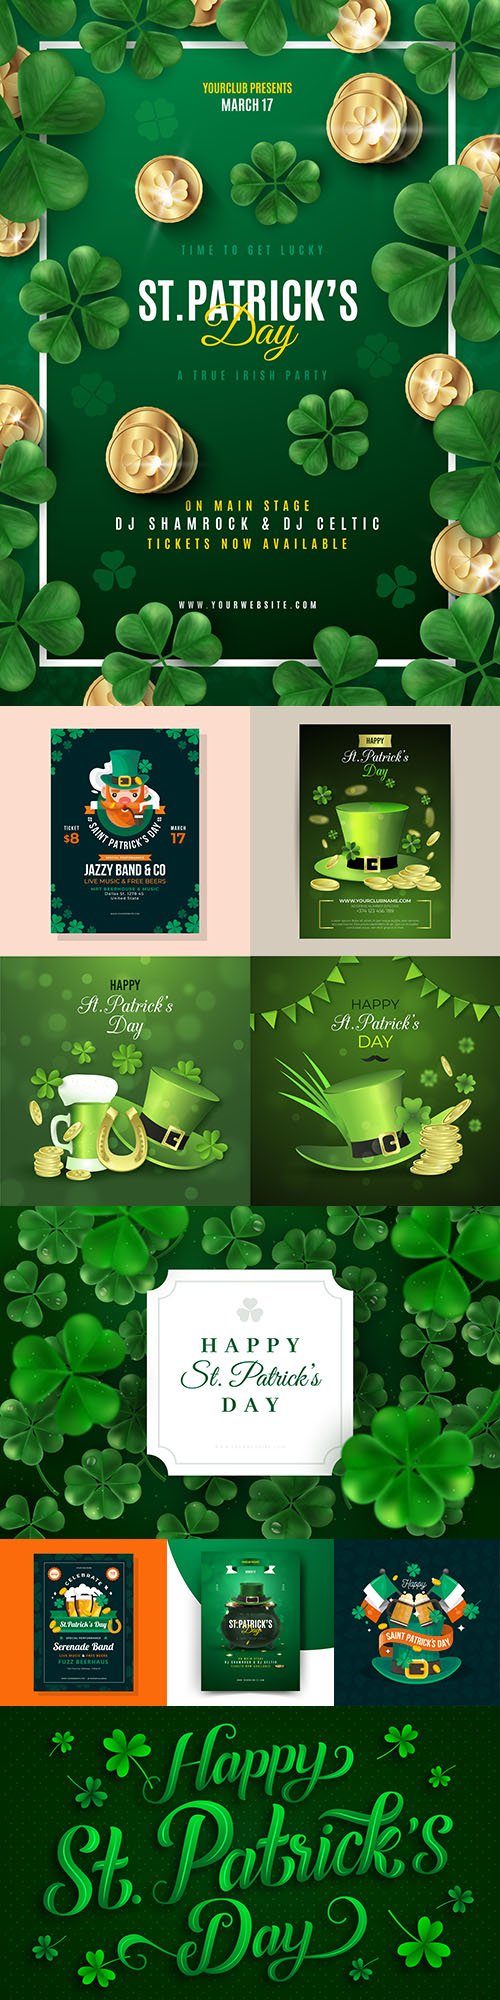 St. Patrick 's Day party design illustrations 2